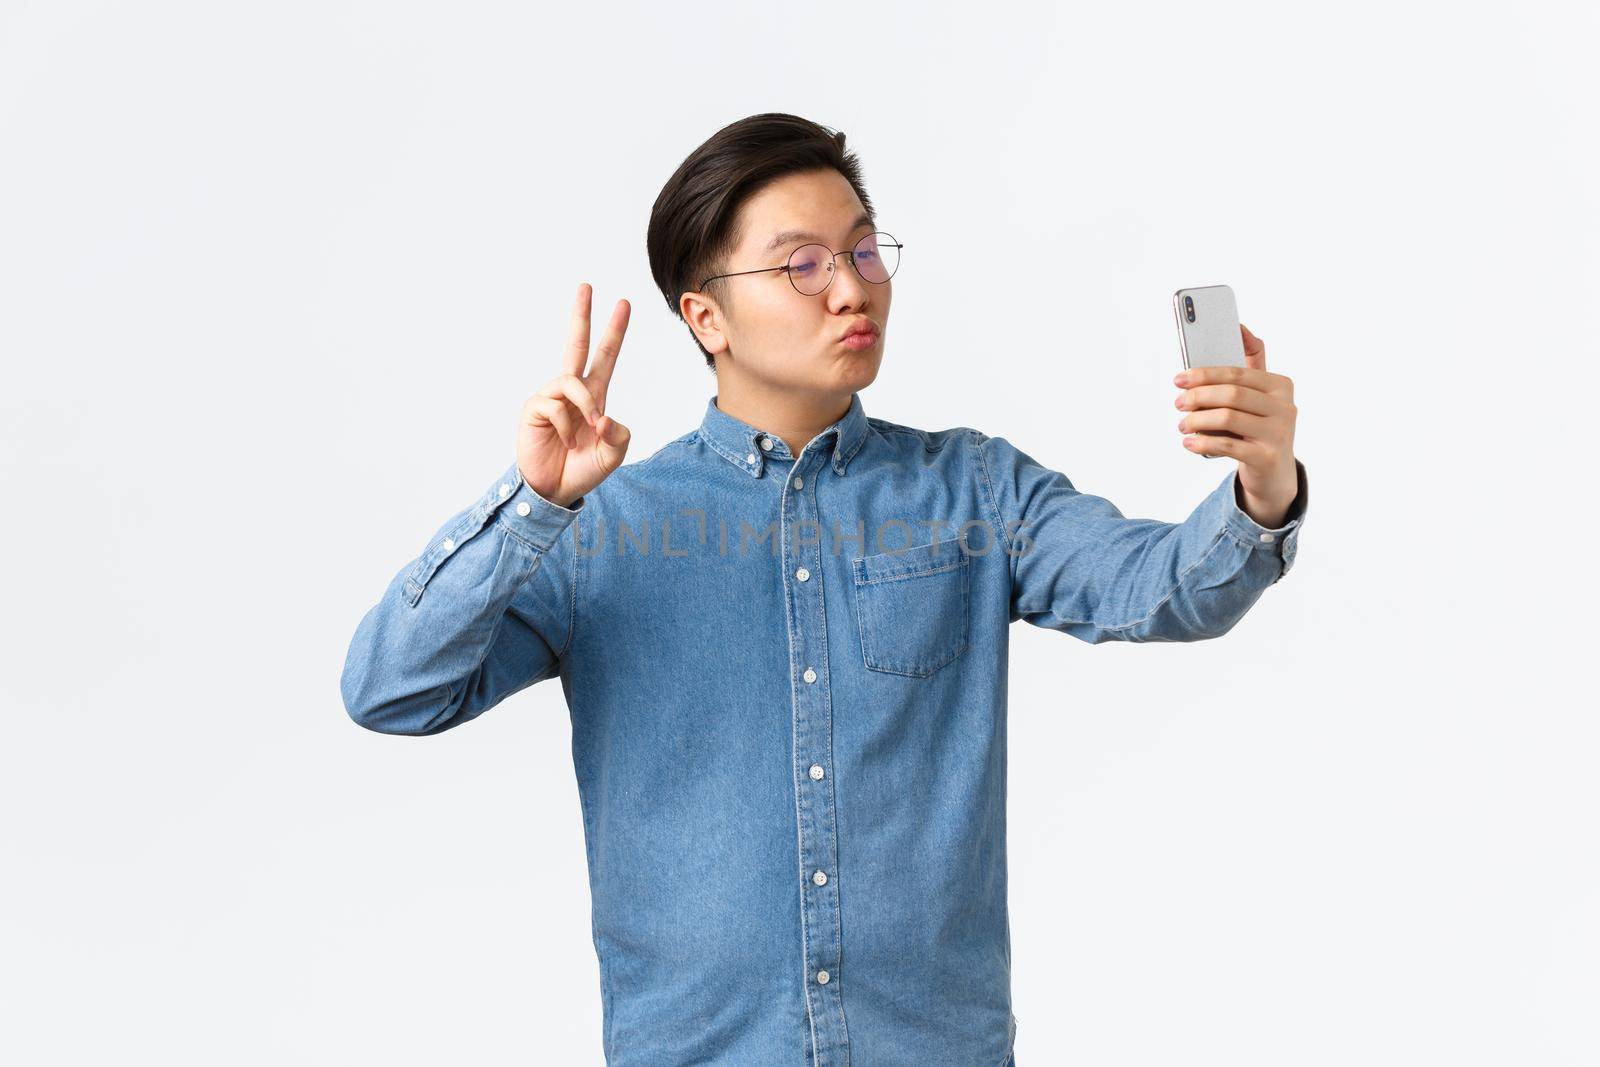 Cute and funny asian young guy pouting silly, taking selfie on smartphone, using photo filter app to change appearance, shooting himself with peace sign and kiss, white background.